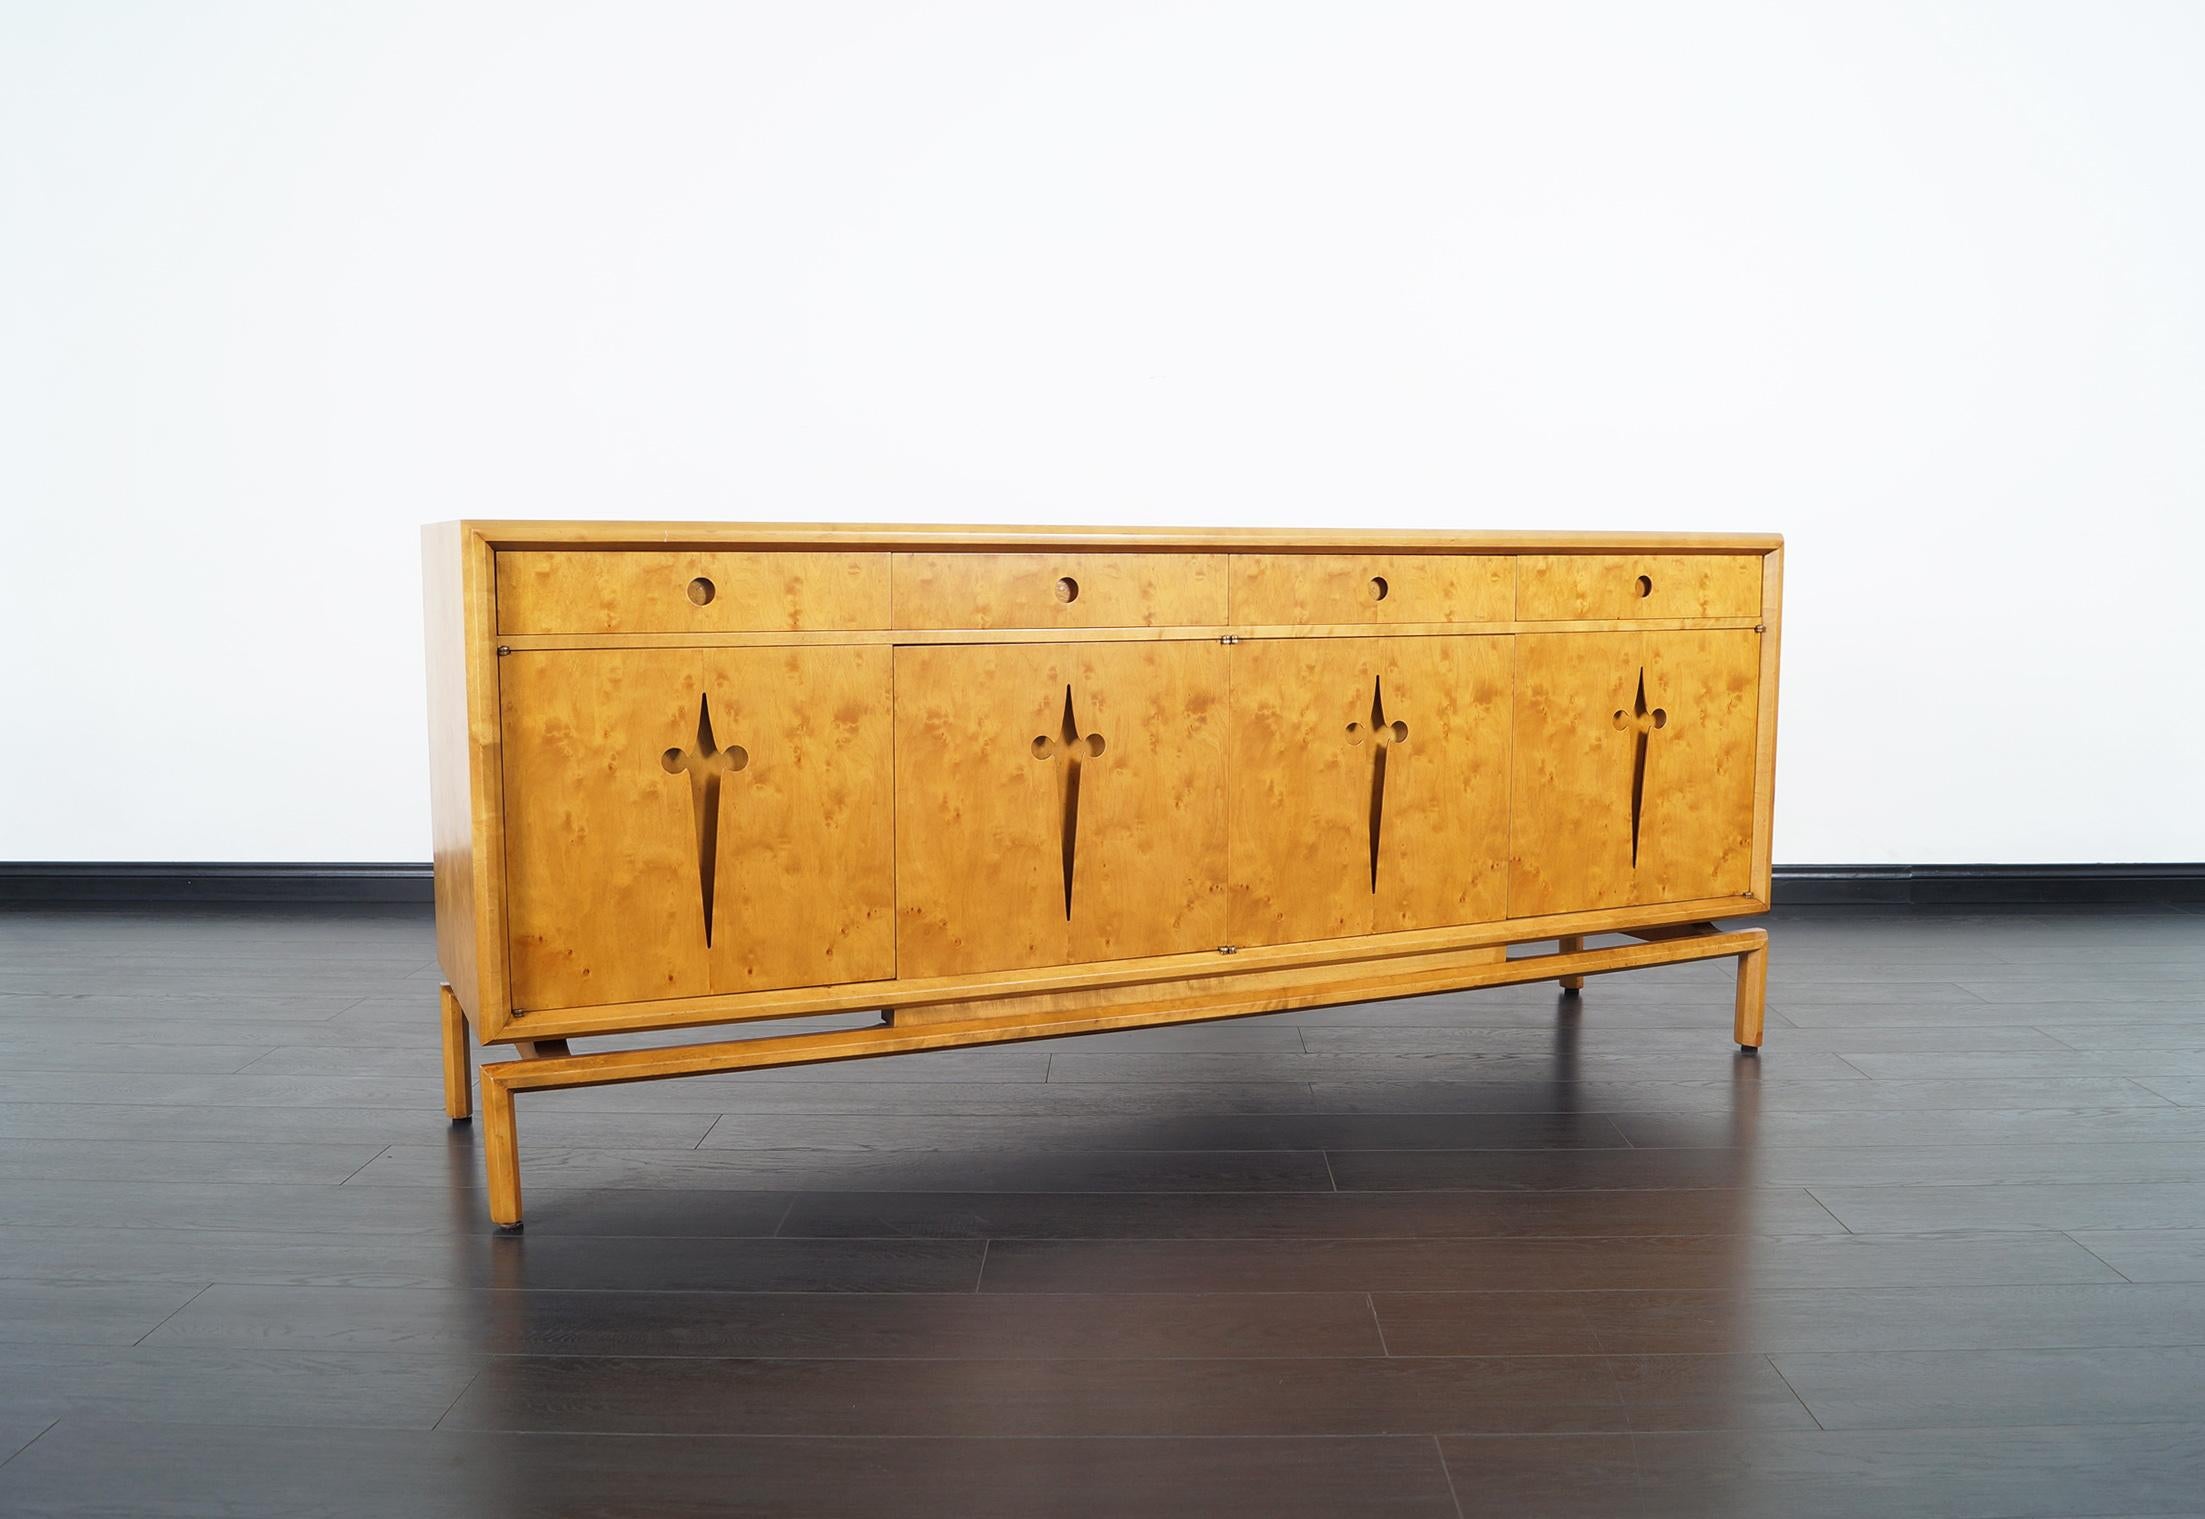 Amazing vintage maple burl credenza designed by Edmond J. Spence. Features a total of ten drawers.